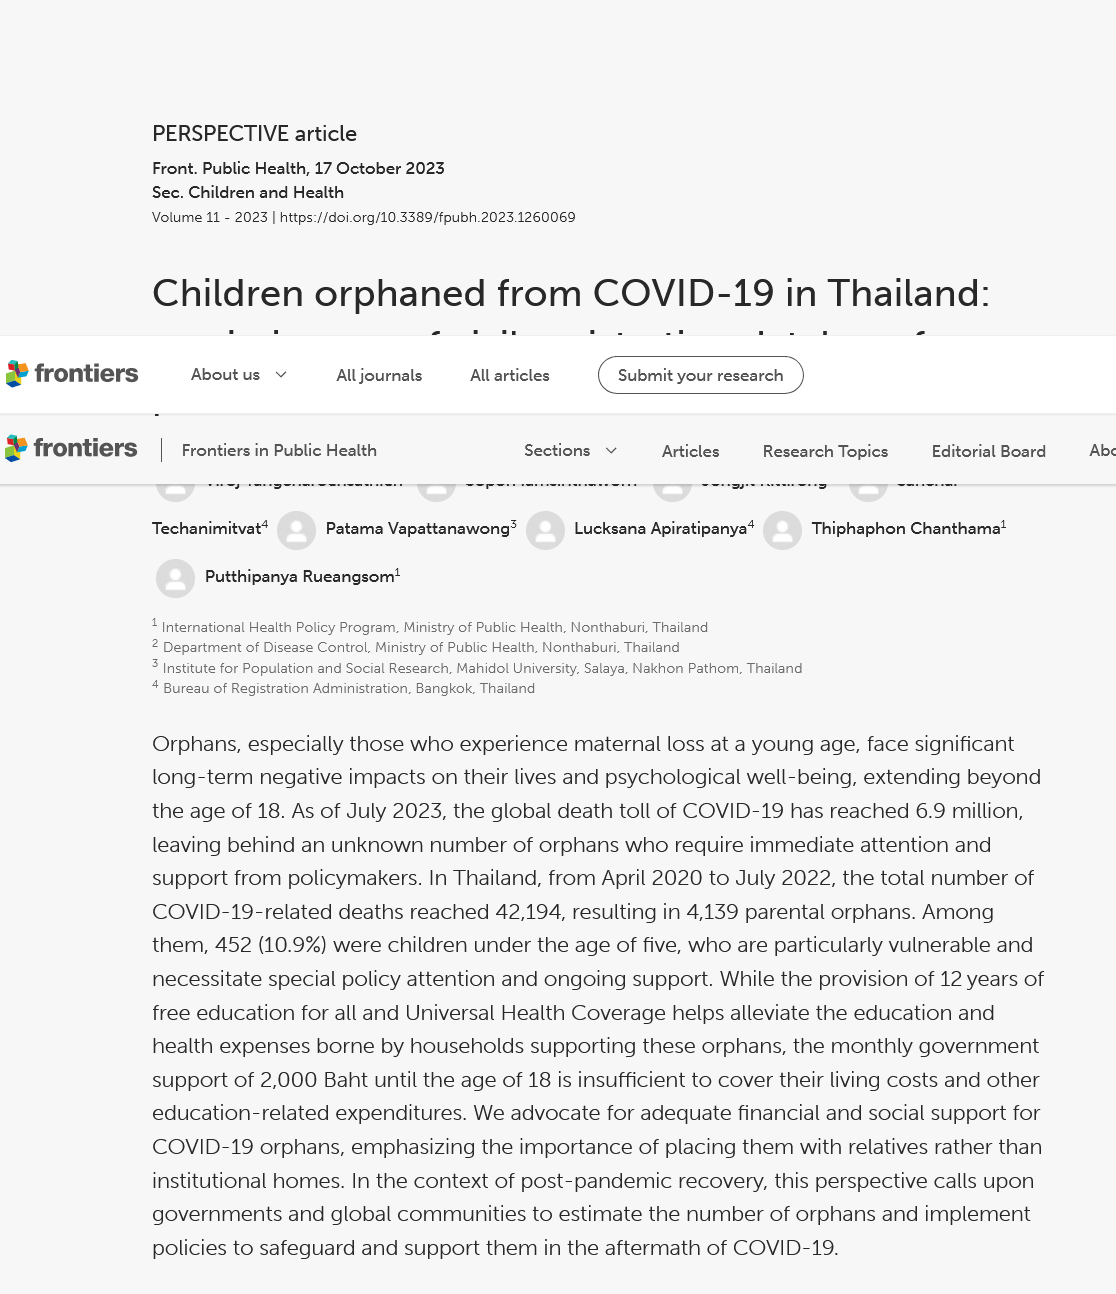 Children orphaned from COVID-19 in Thailand: maximize use of civil registration database for policies